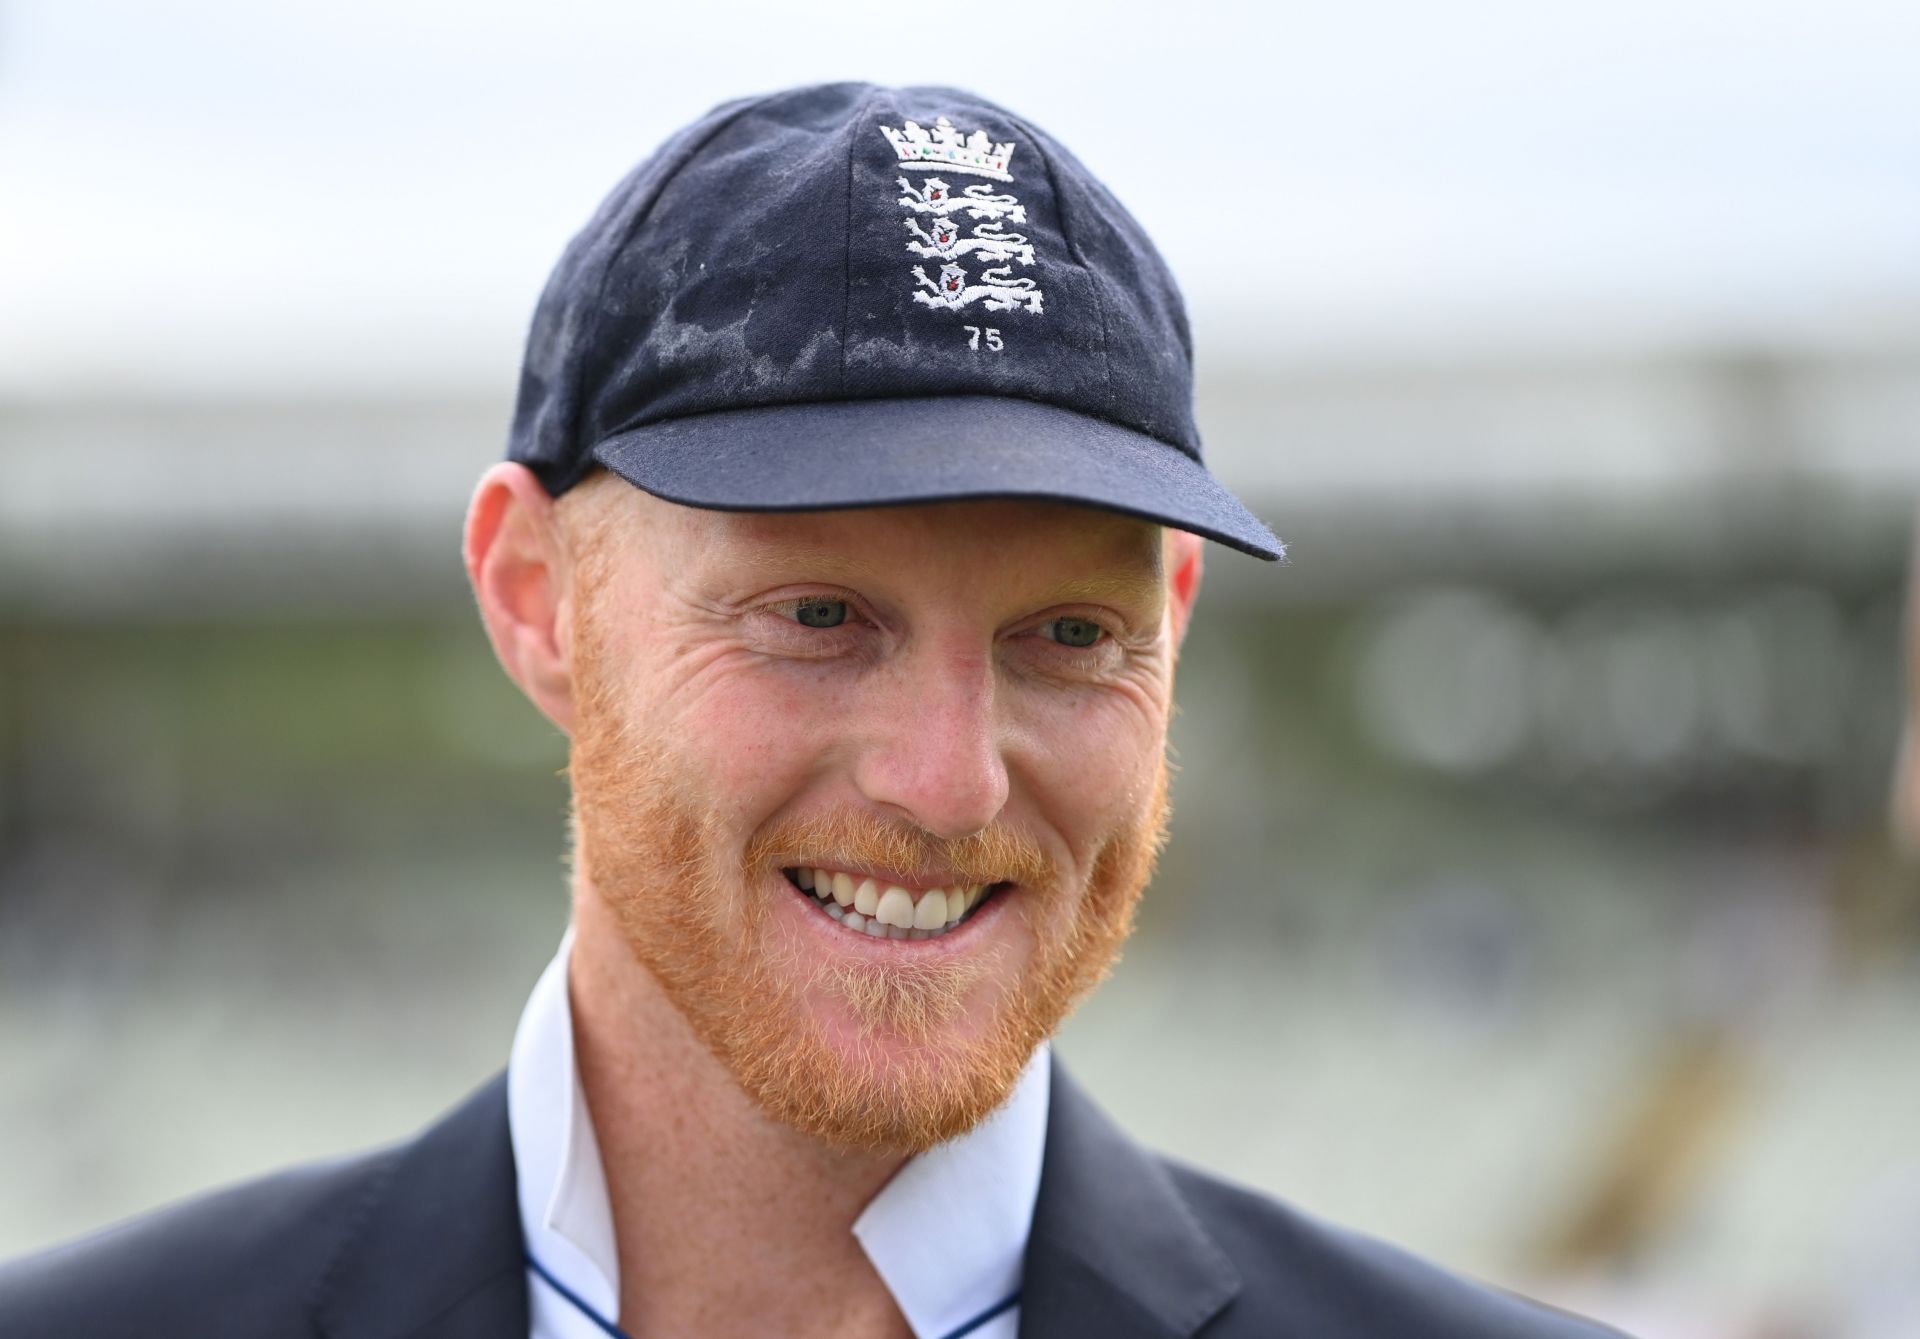 Ben Stokes succeeded Joe Root as Test captain. (Credits: Getty)